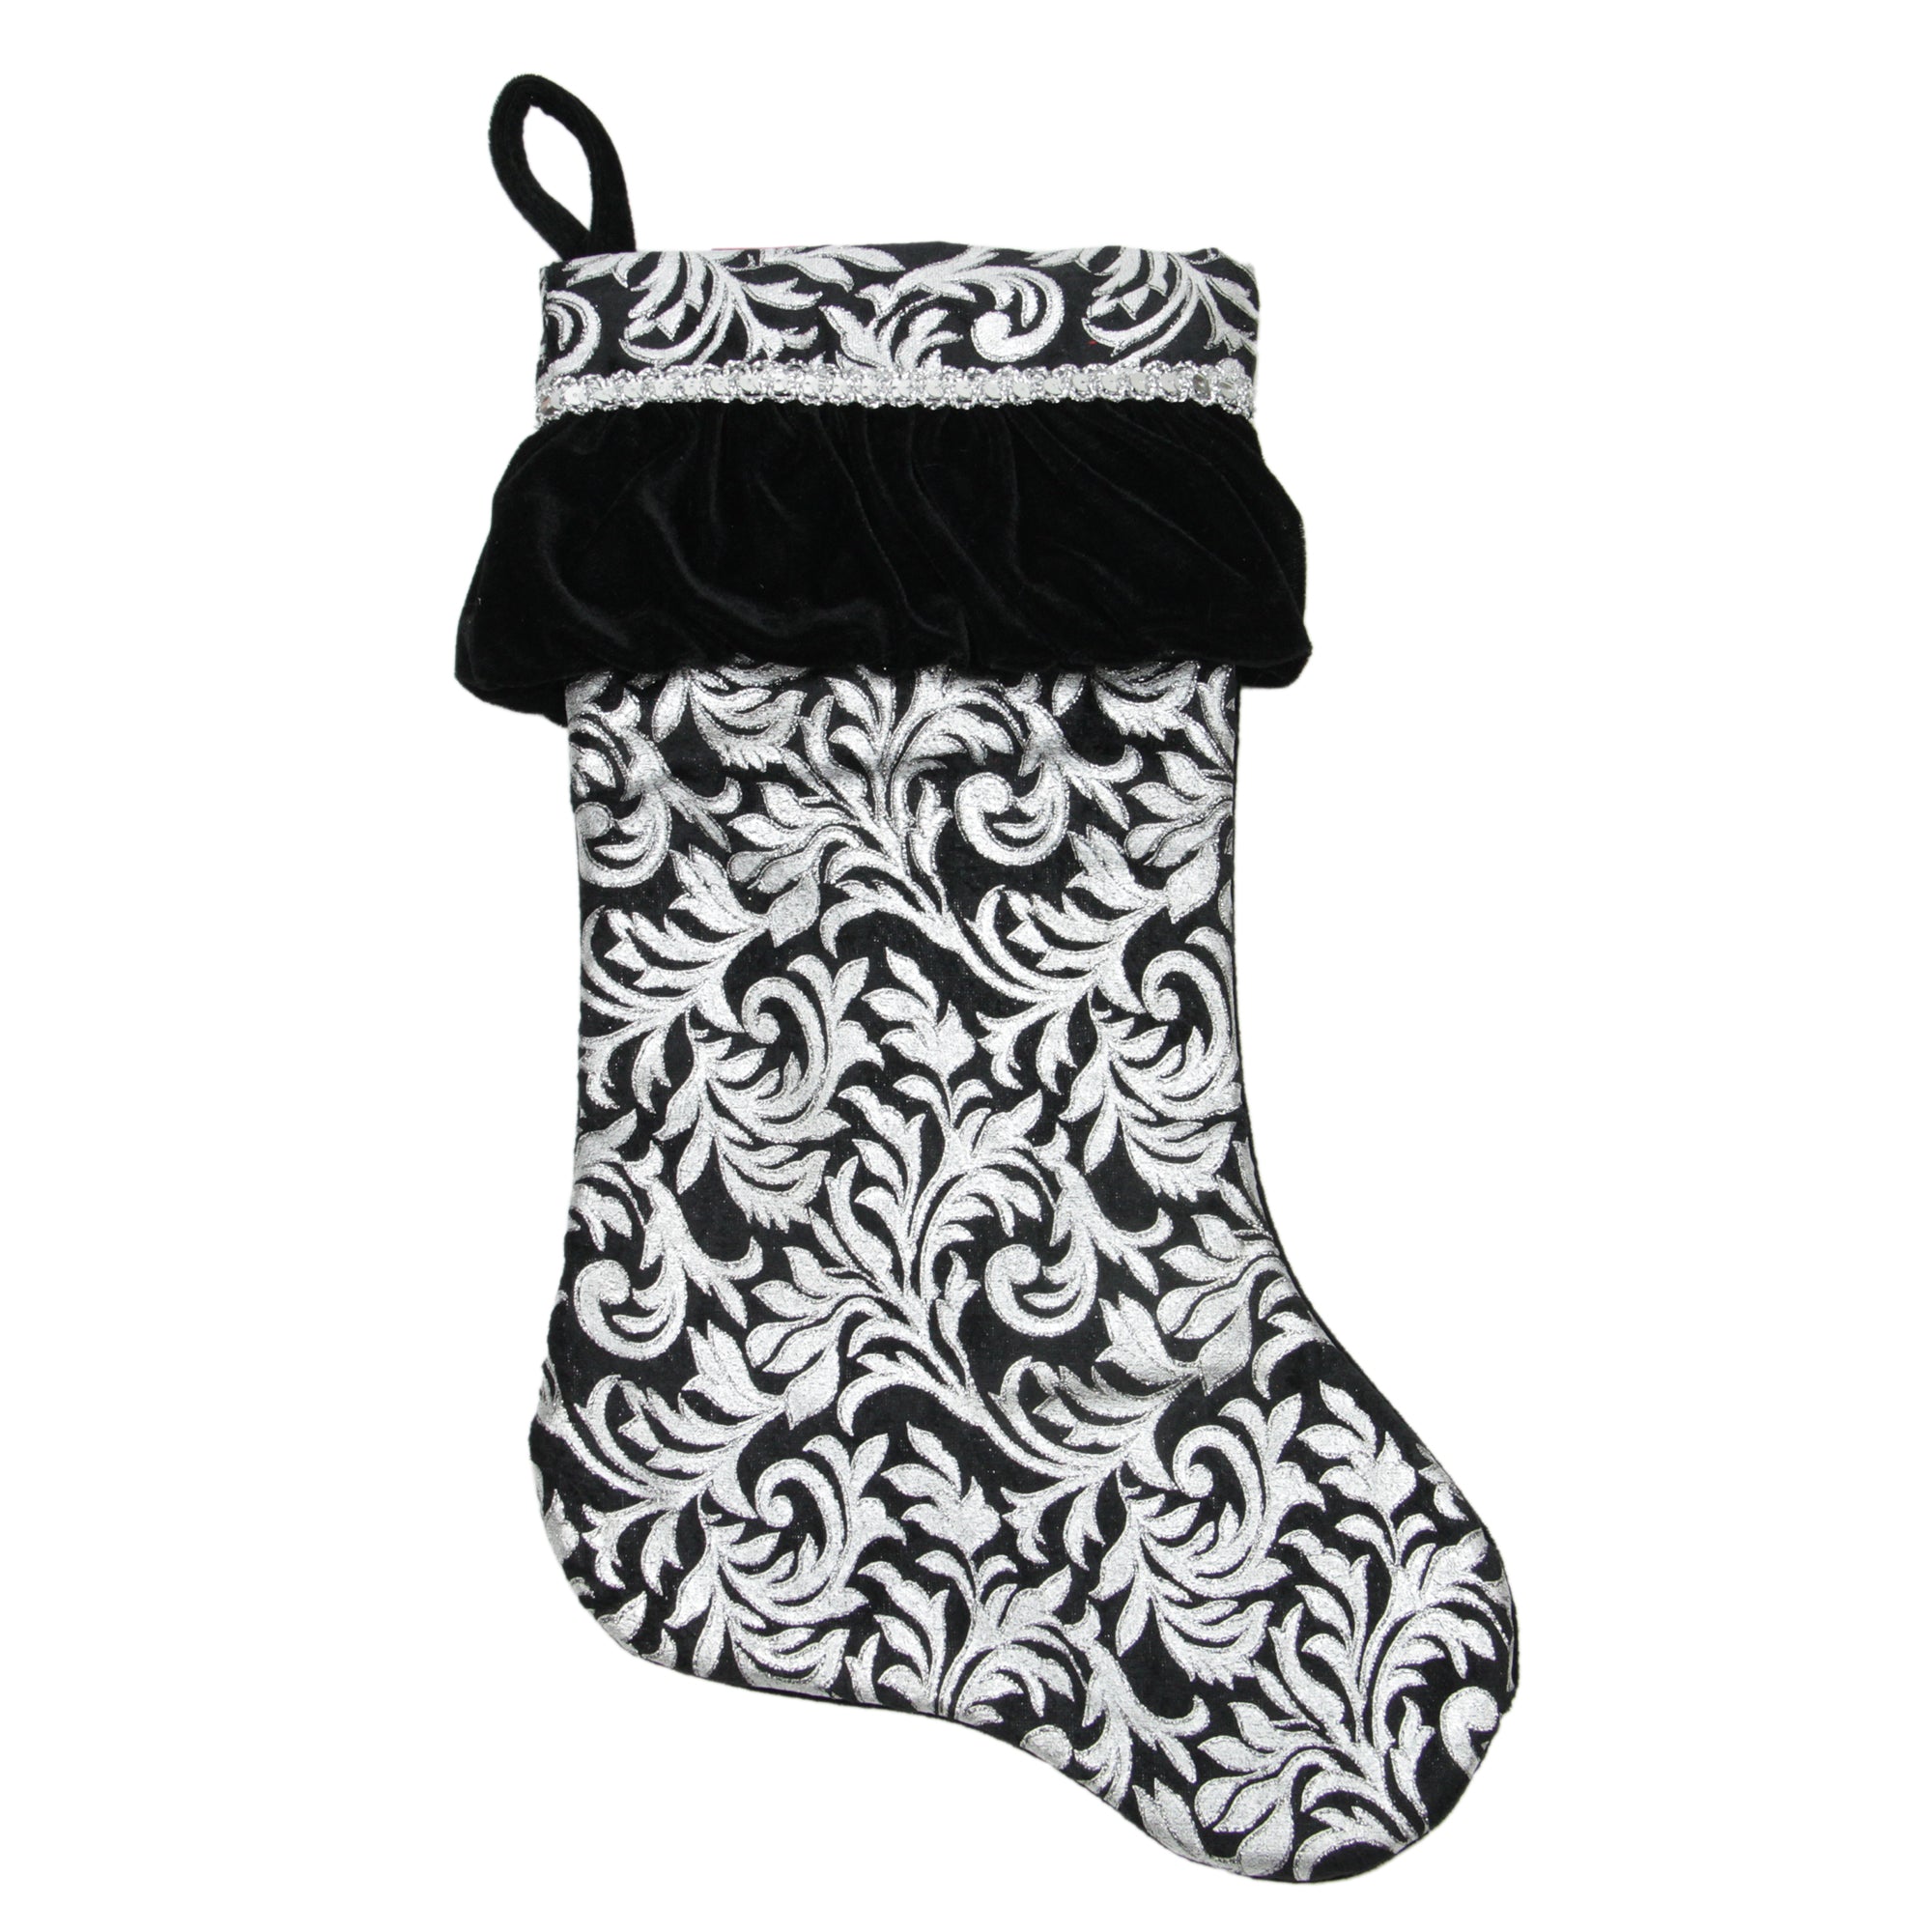 20" Black and Silver Floral Velvet Christmas Stocking with Venetian-Style Ruffle Cuff